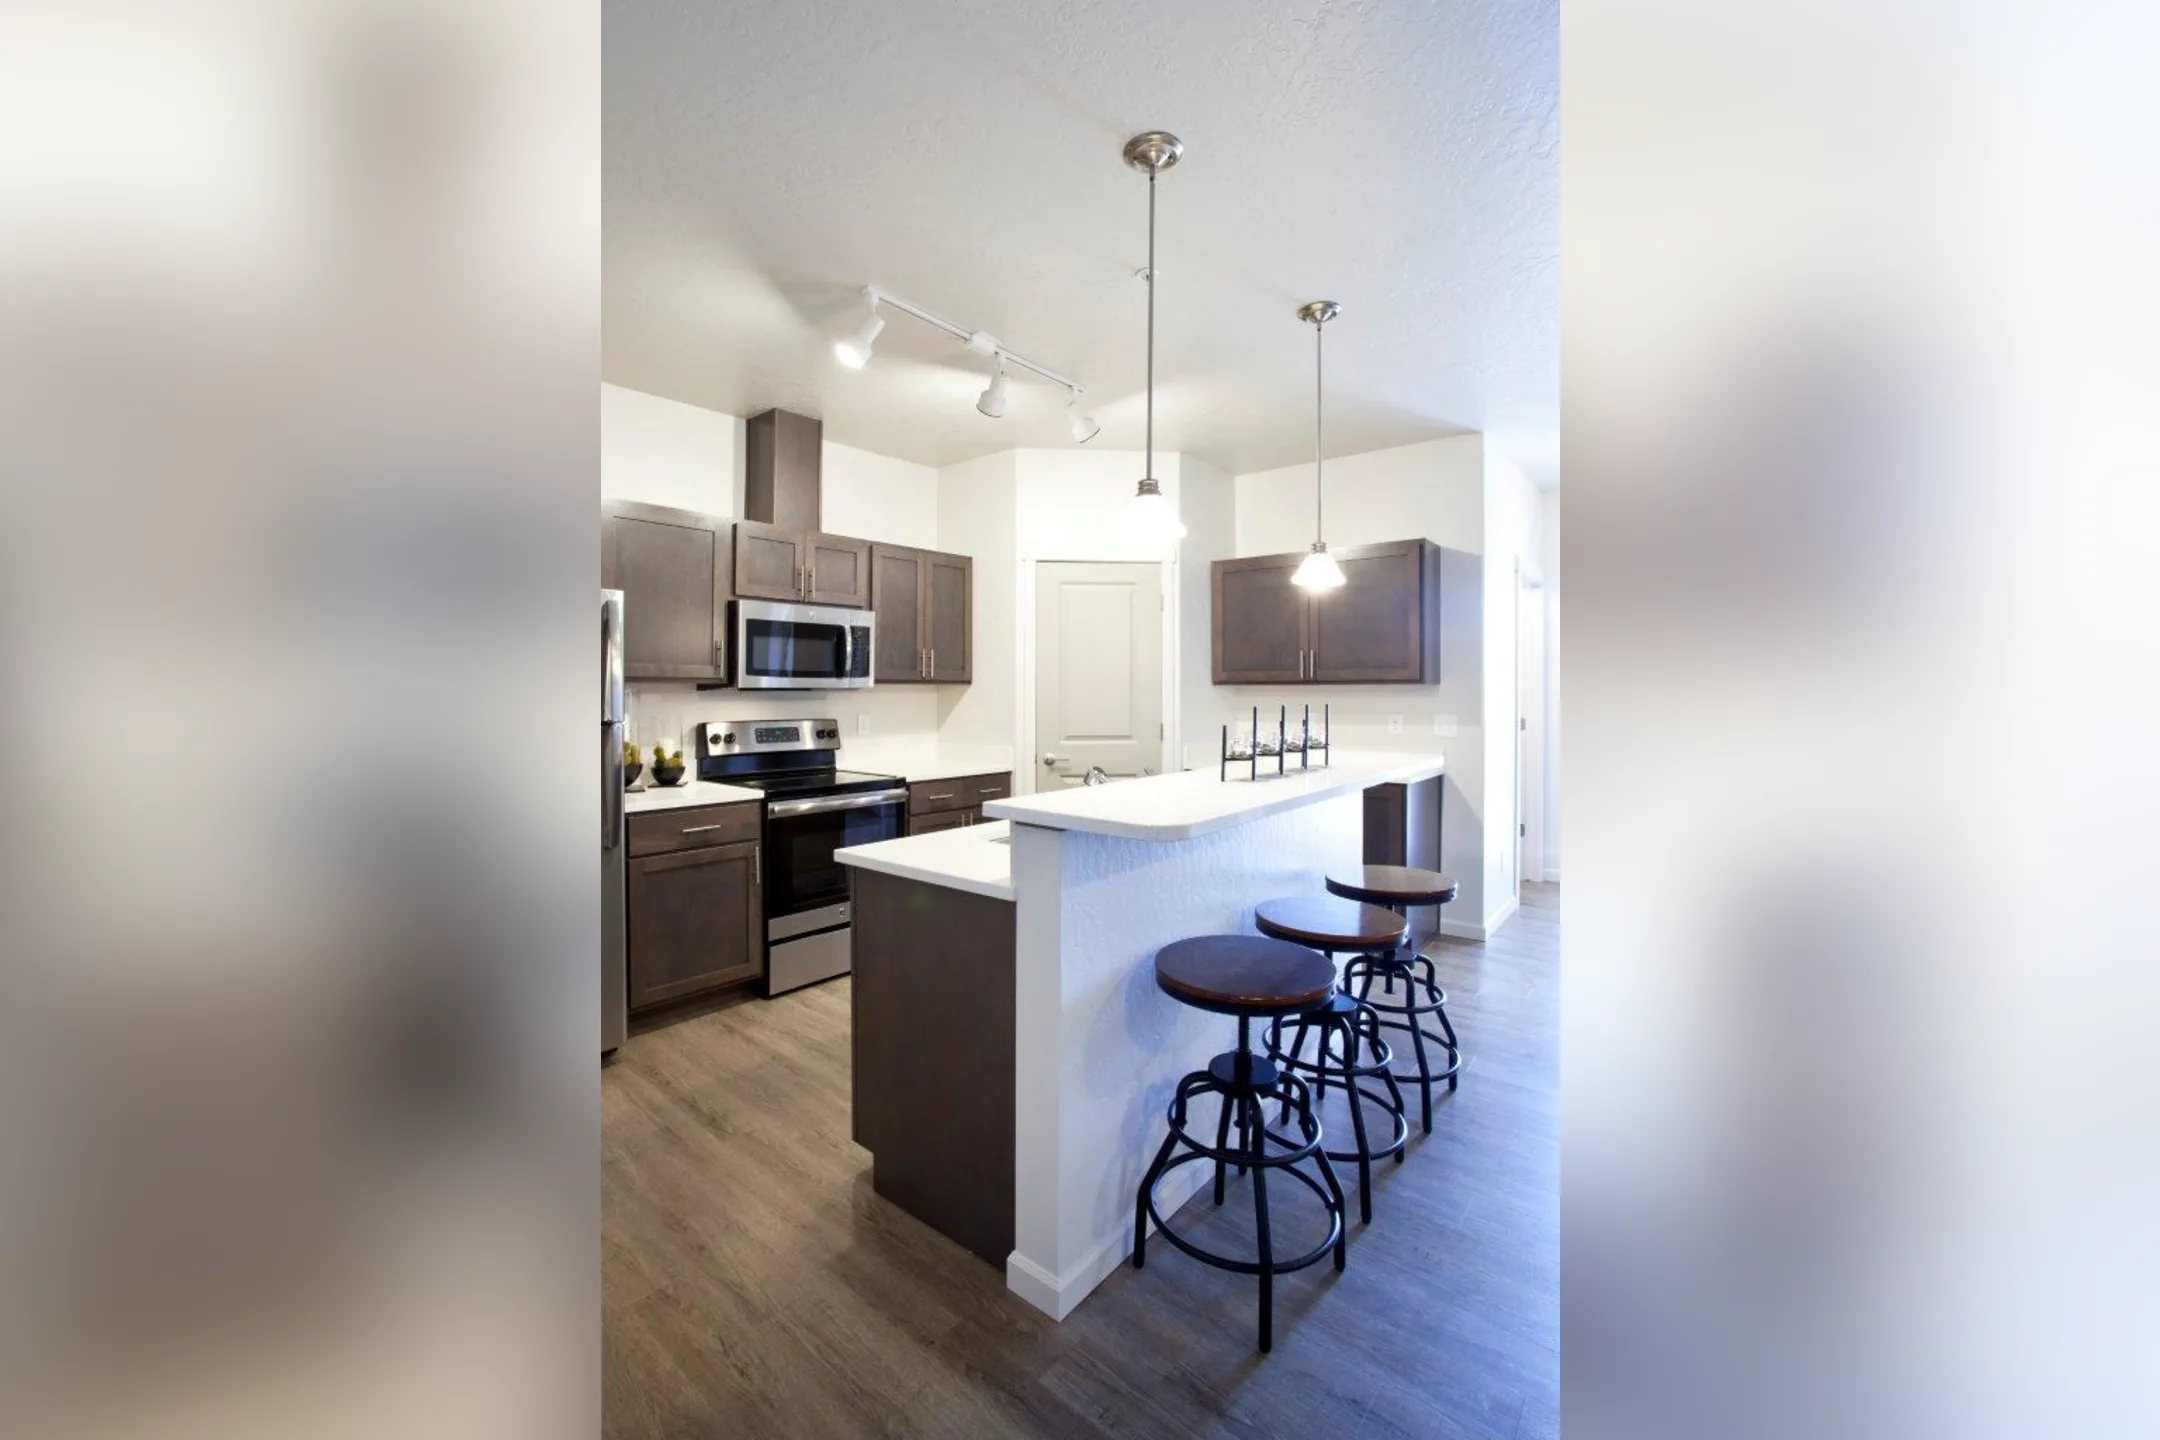 Kitchen - Prairie Pointe Apartments and Townhomes - Coeur D Alene, ID